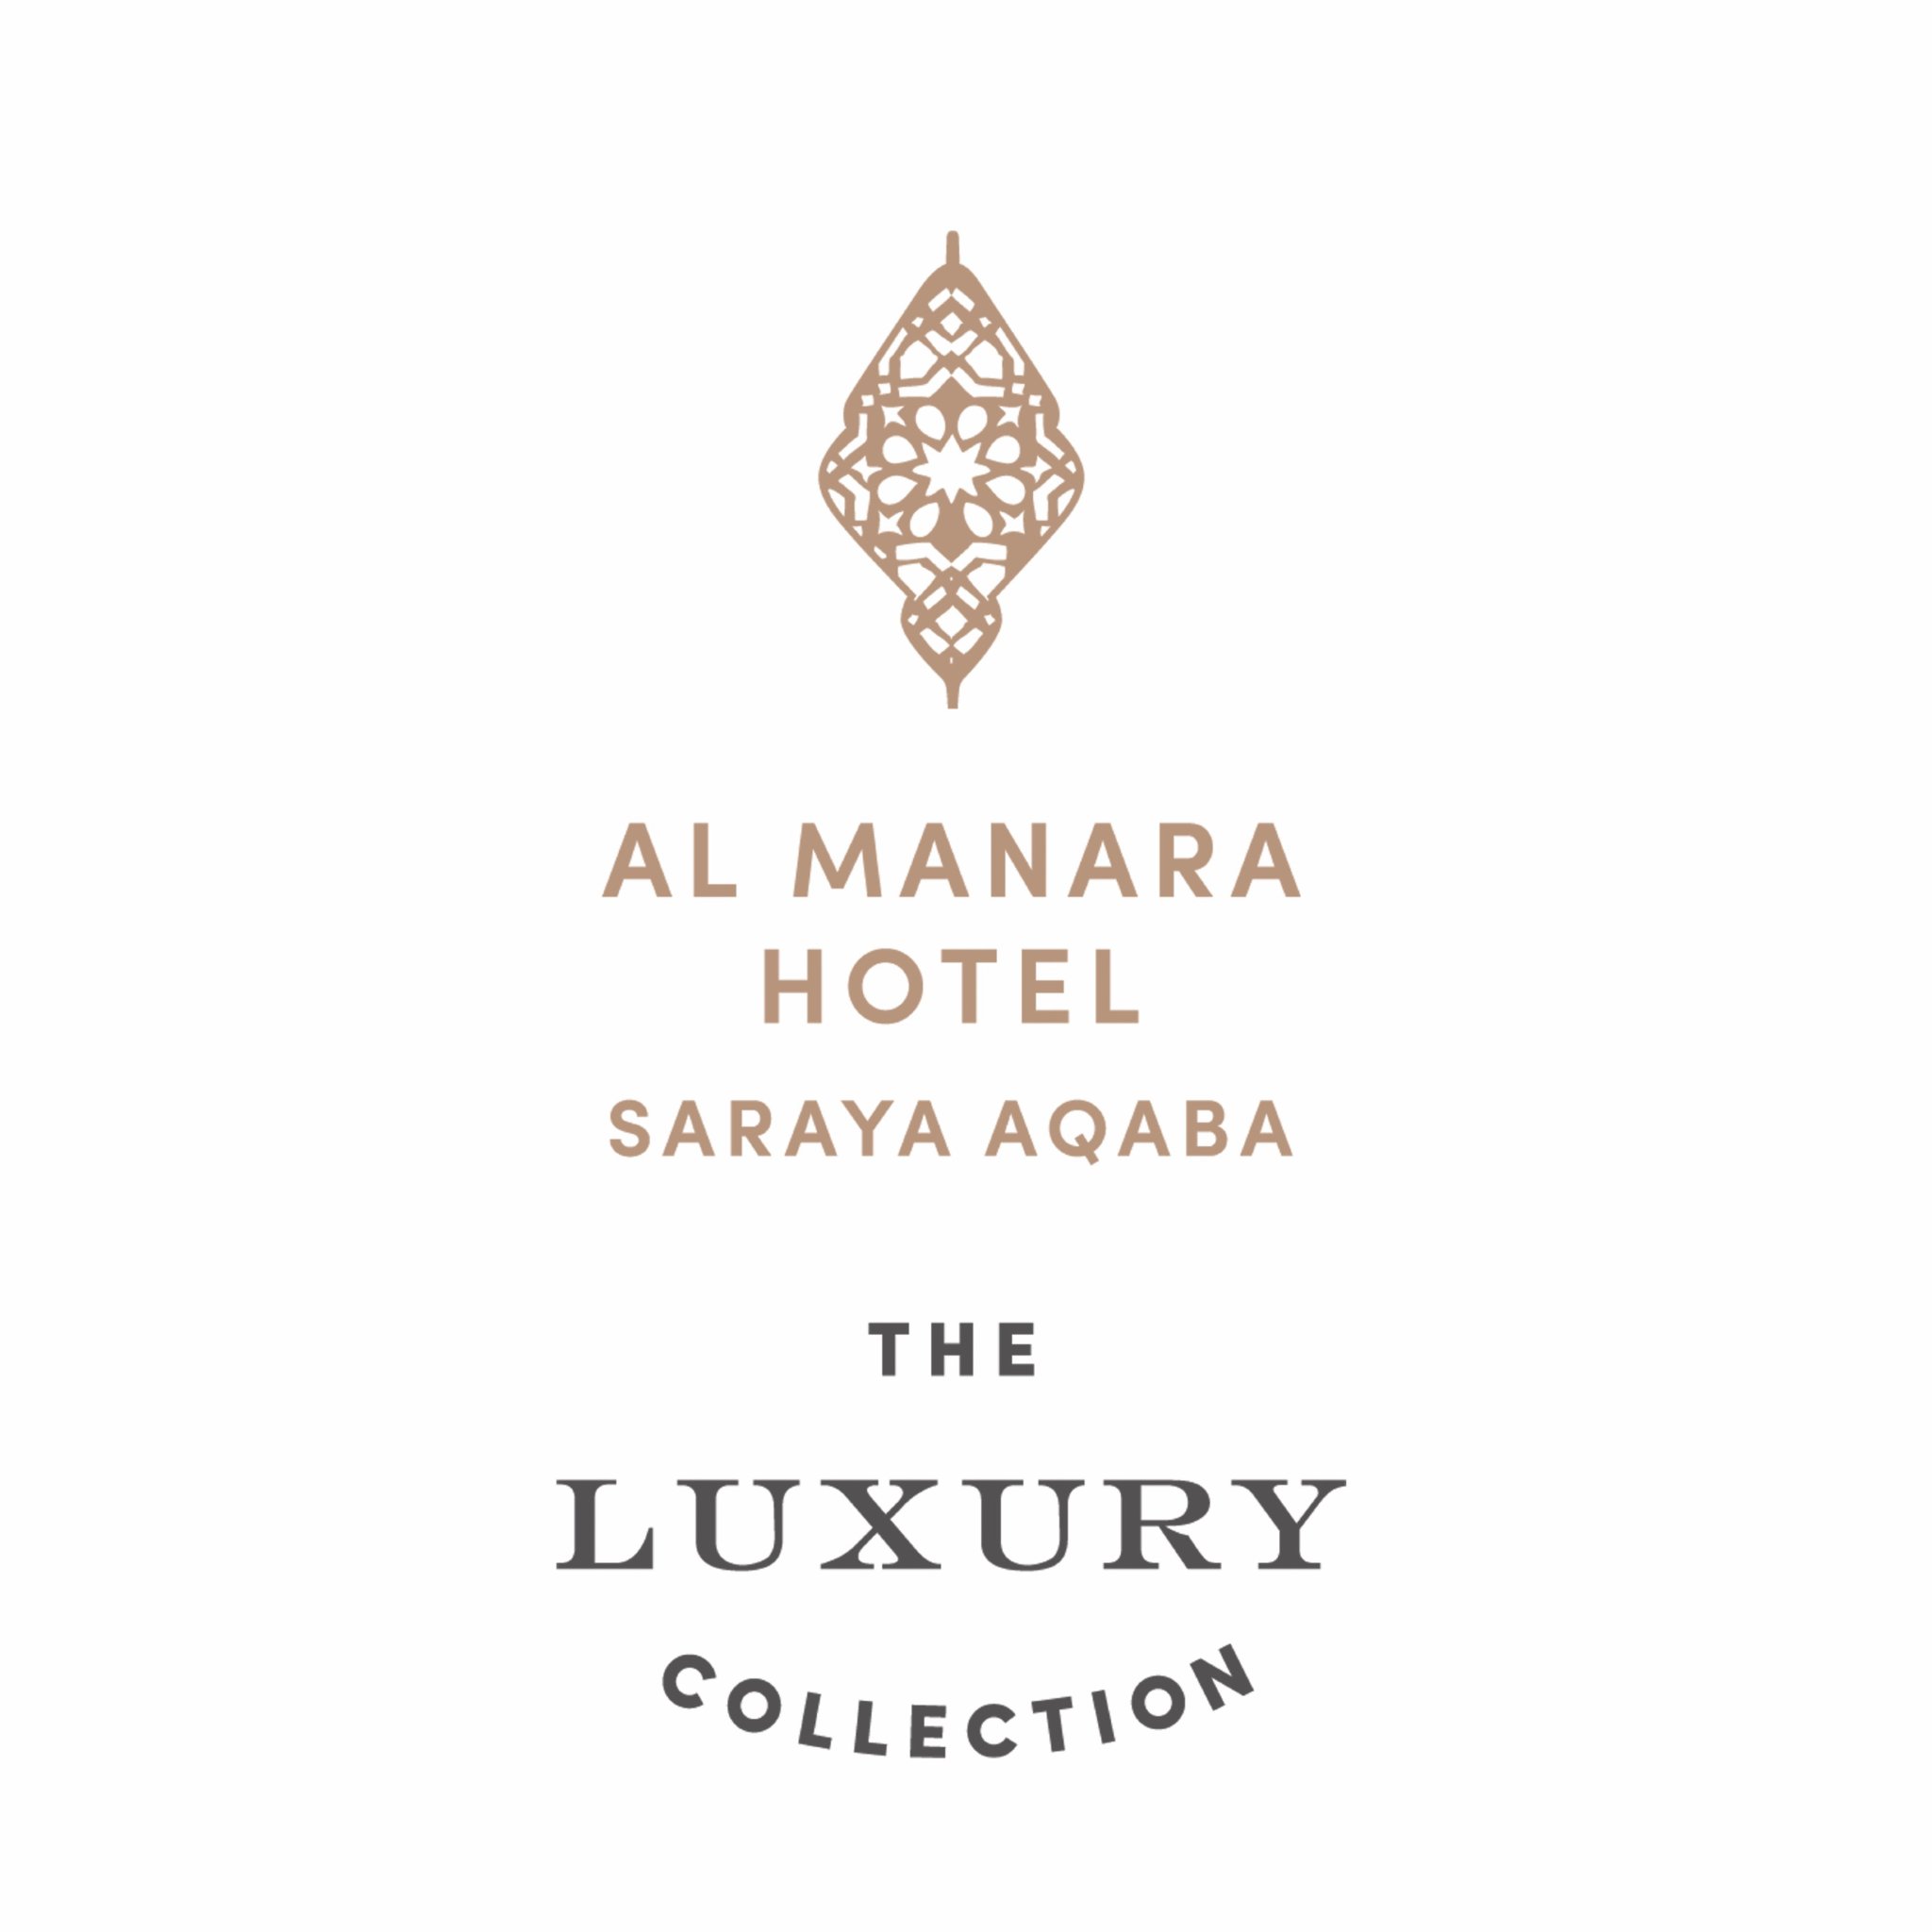 The first-ever Luxury Collection Hotel in Jordan, Al Manara brings a world of indigenous experiences to life on the Red Sea.